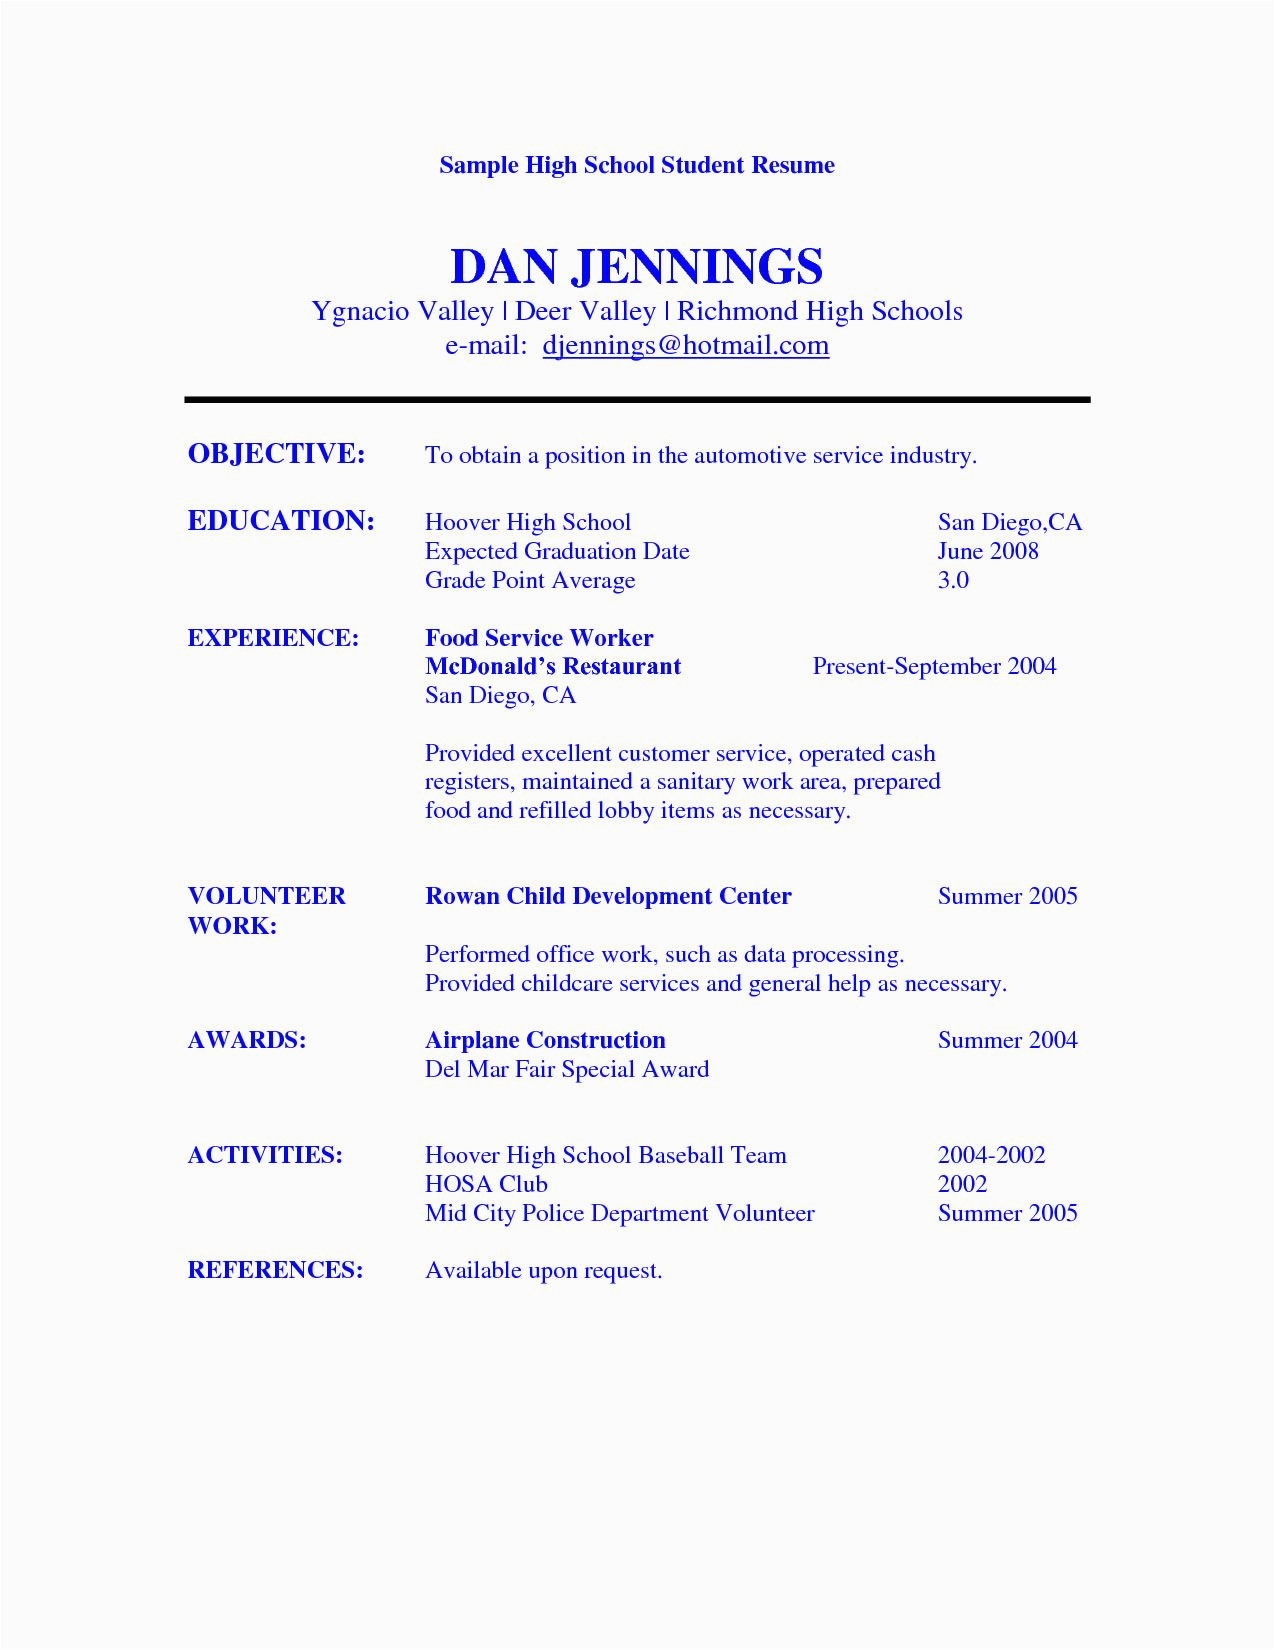 Sample Resume Objectives for High School Students Business Skills Resume